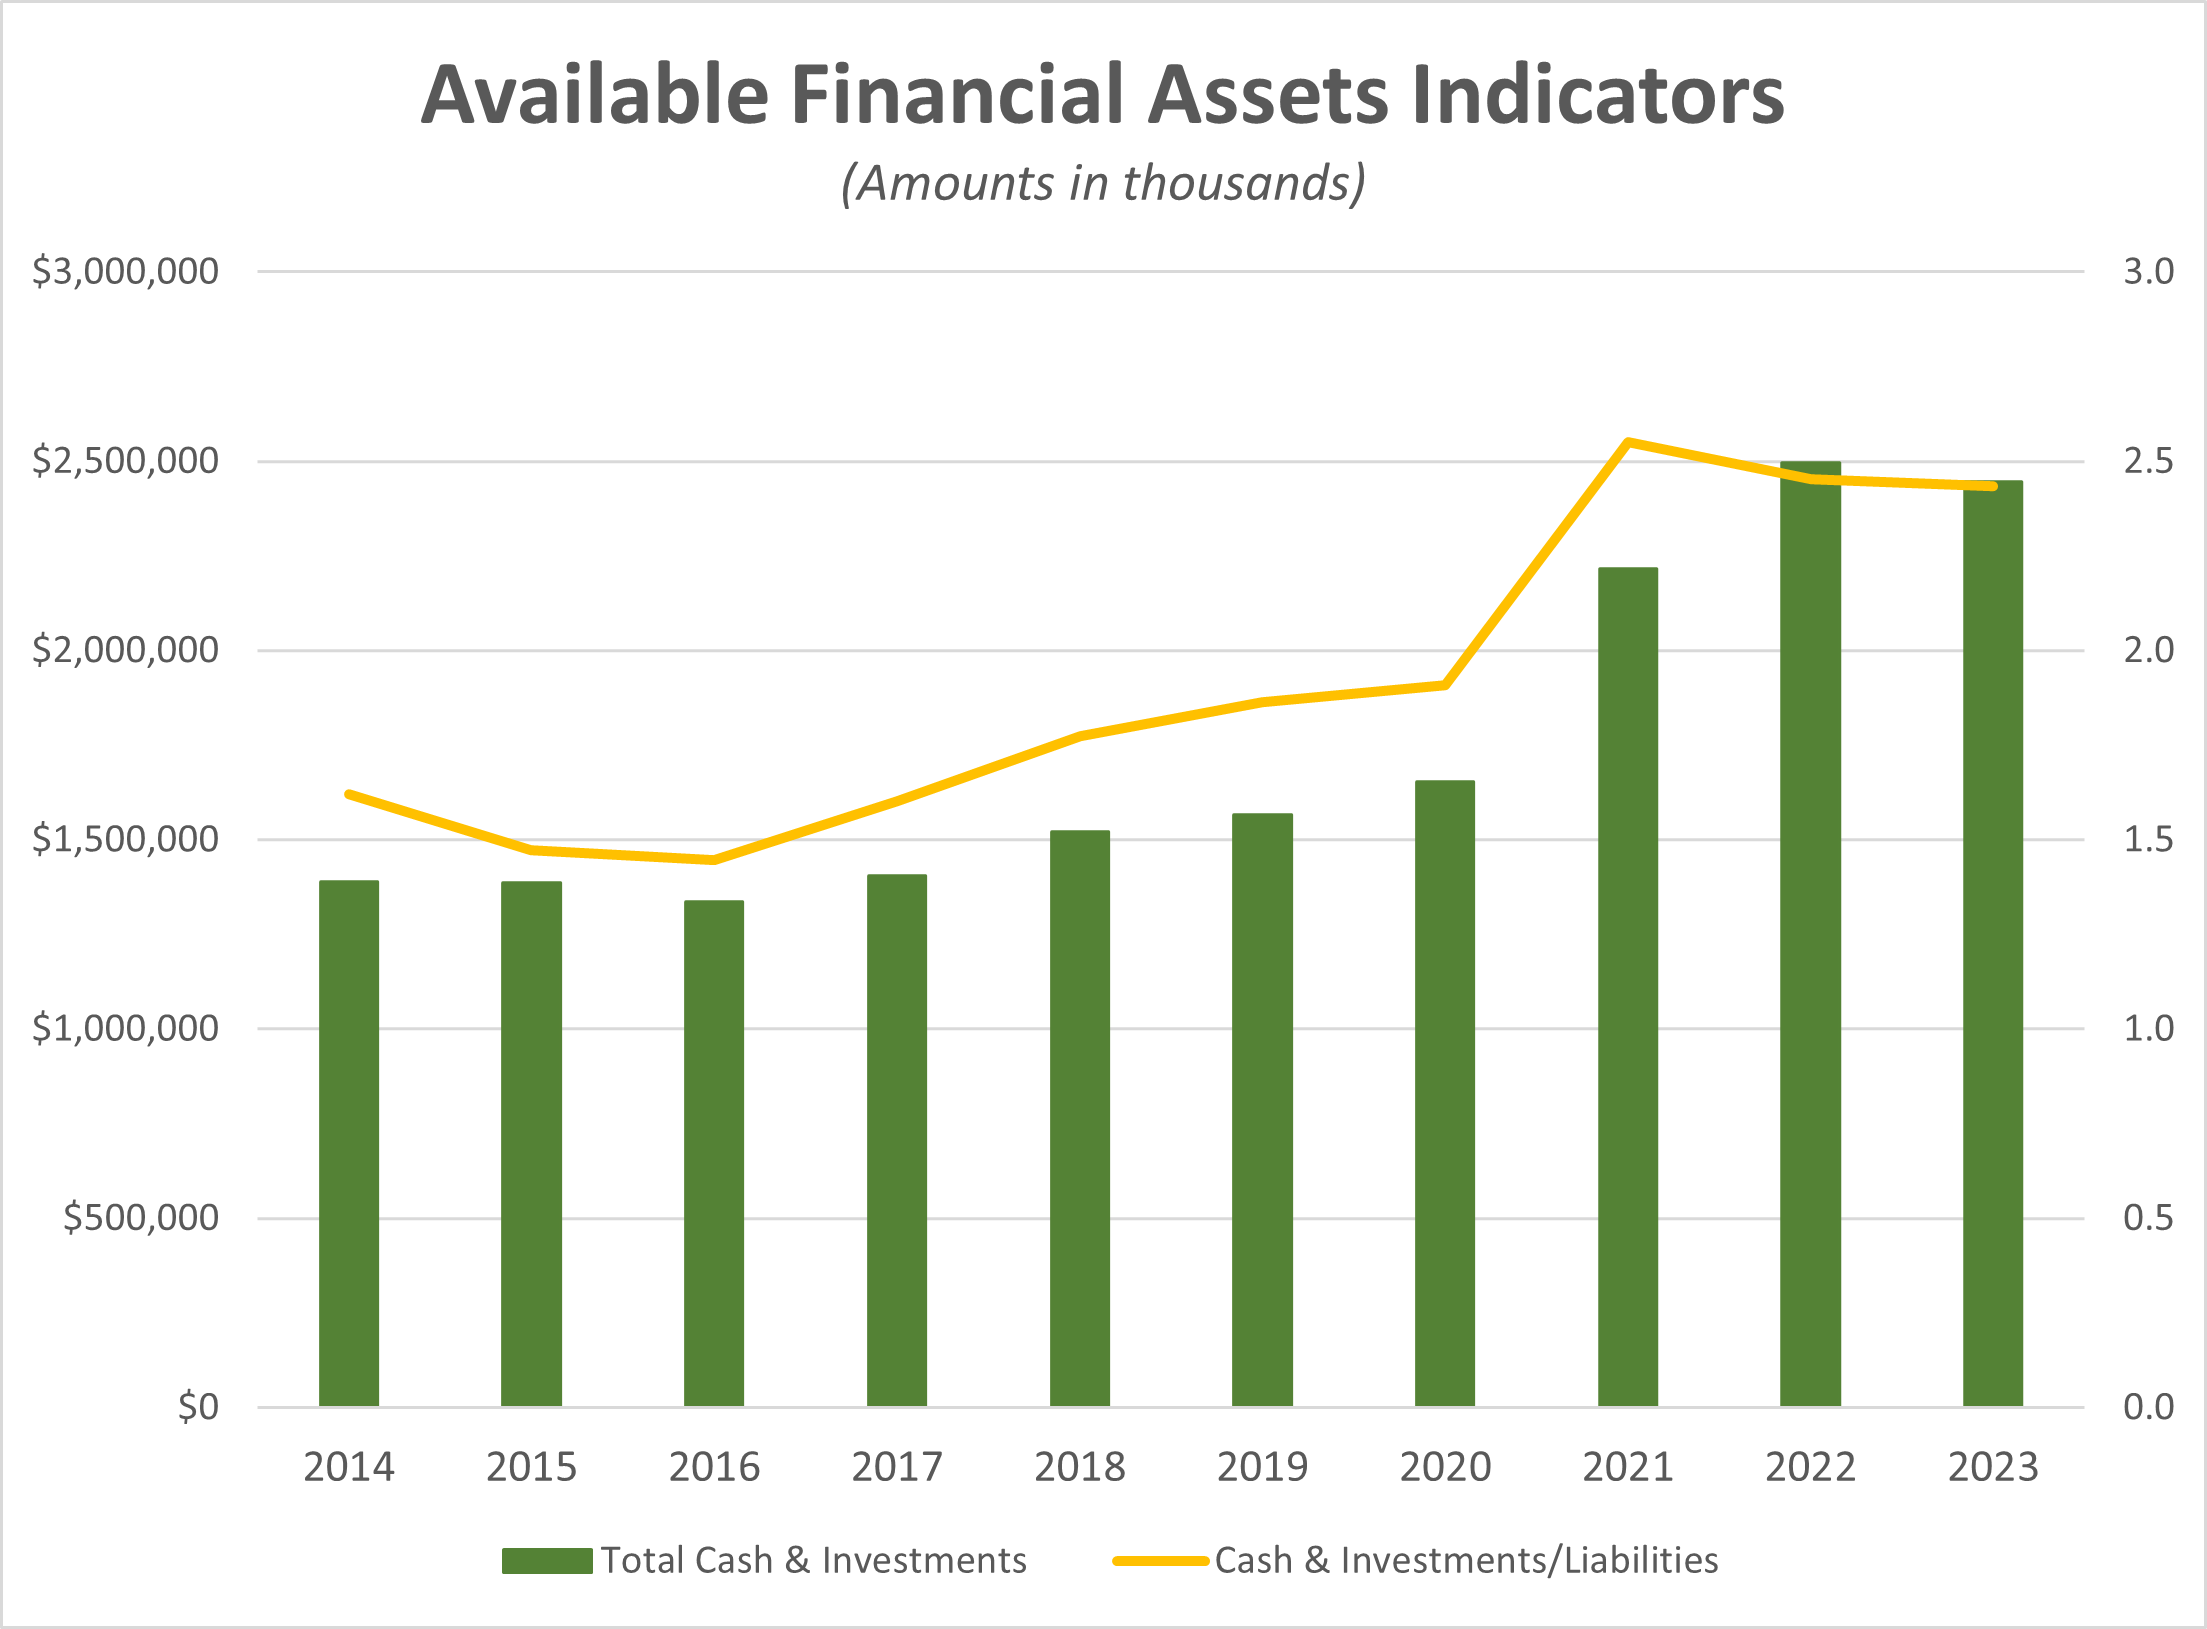 Available Financial Assets Indicators